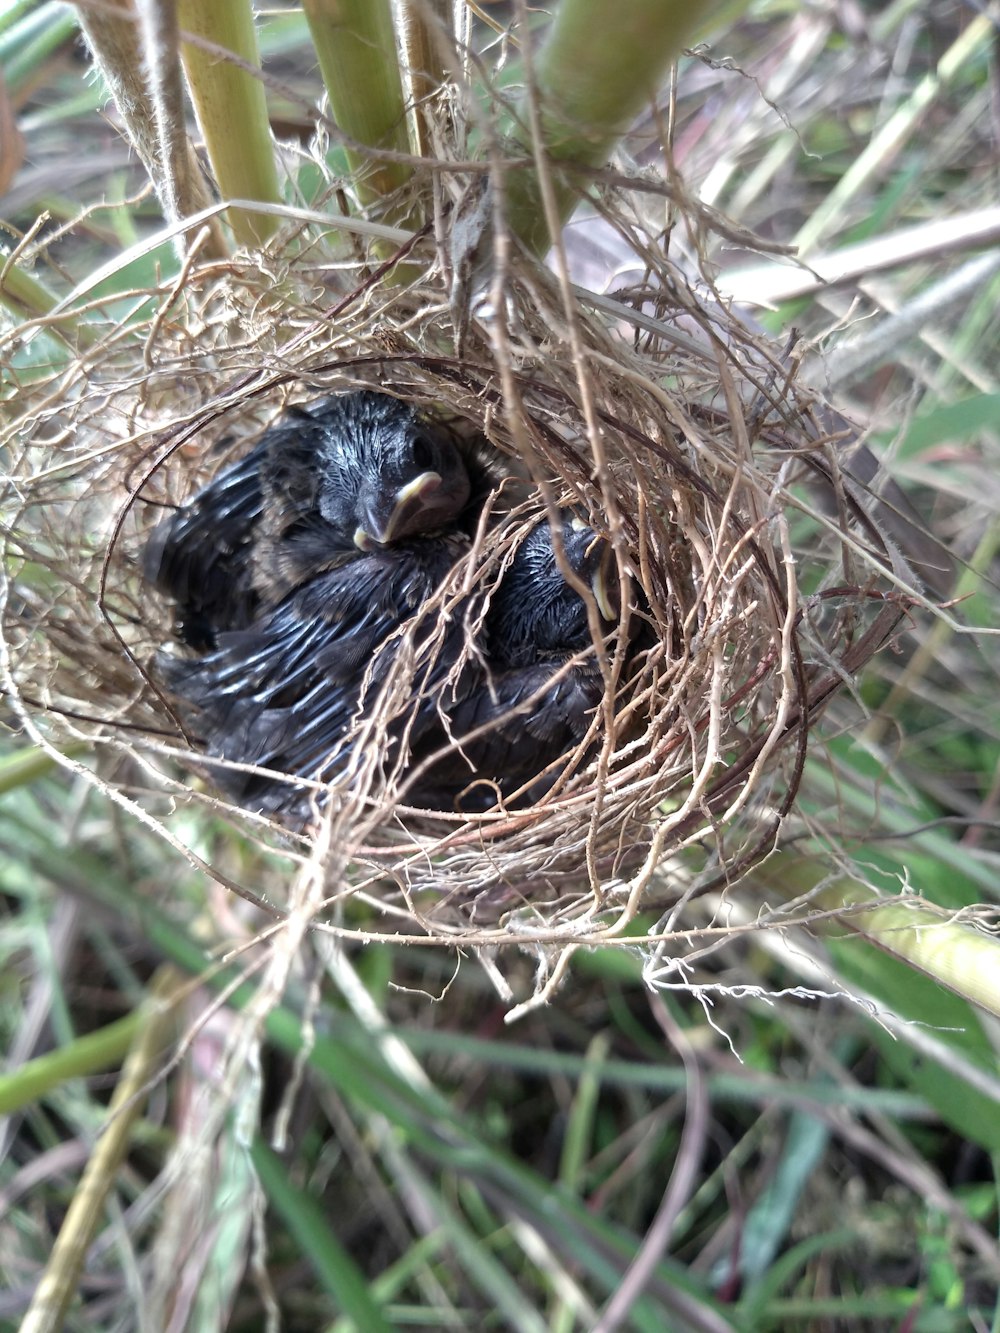 a baby bird is in a nest in the grass